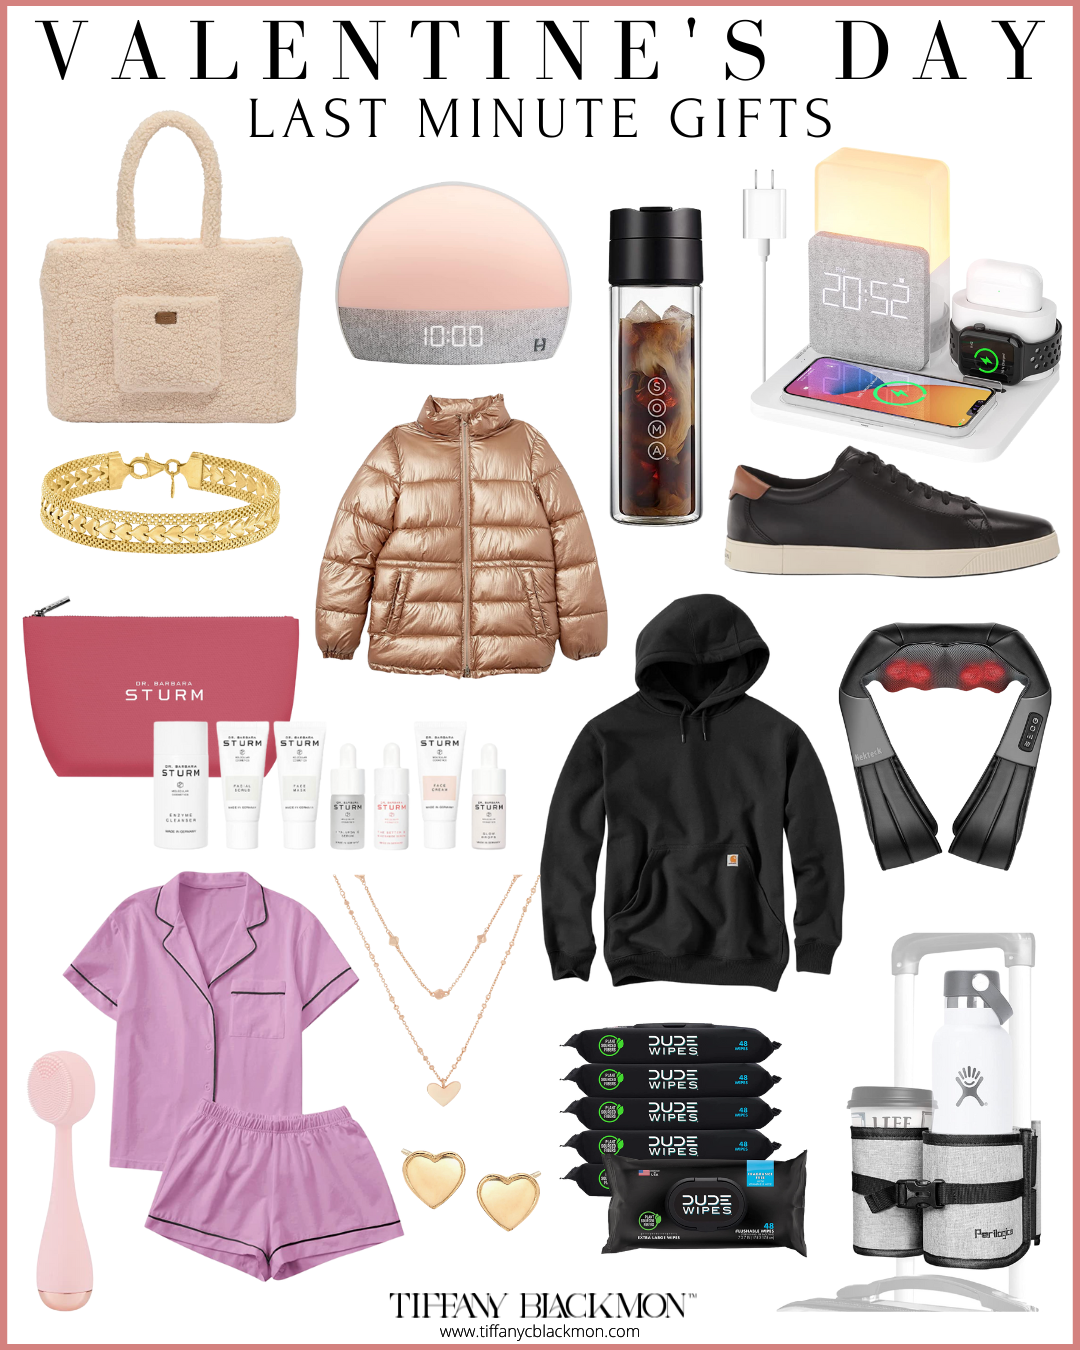 Last Minute Gift Guide  Curbside Pickup Retailers and Gifts 